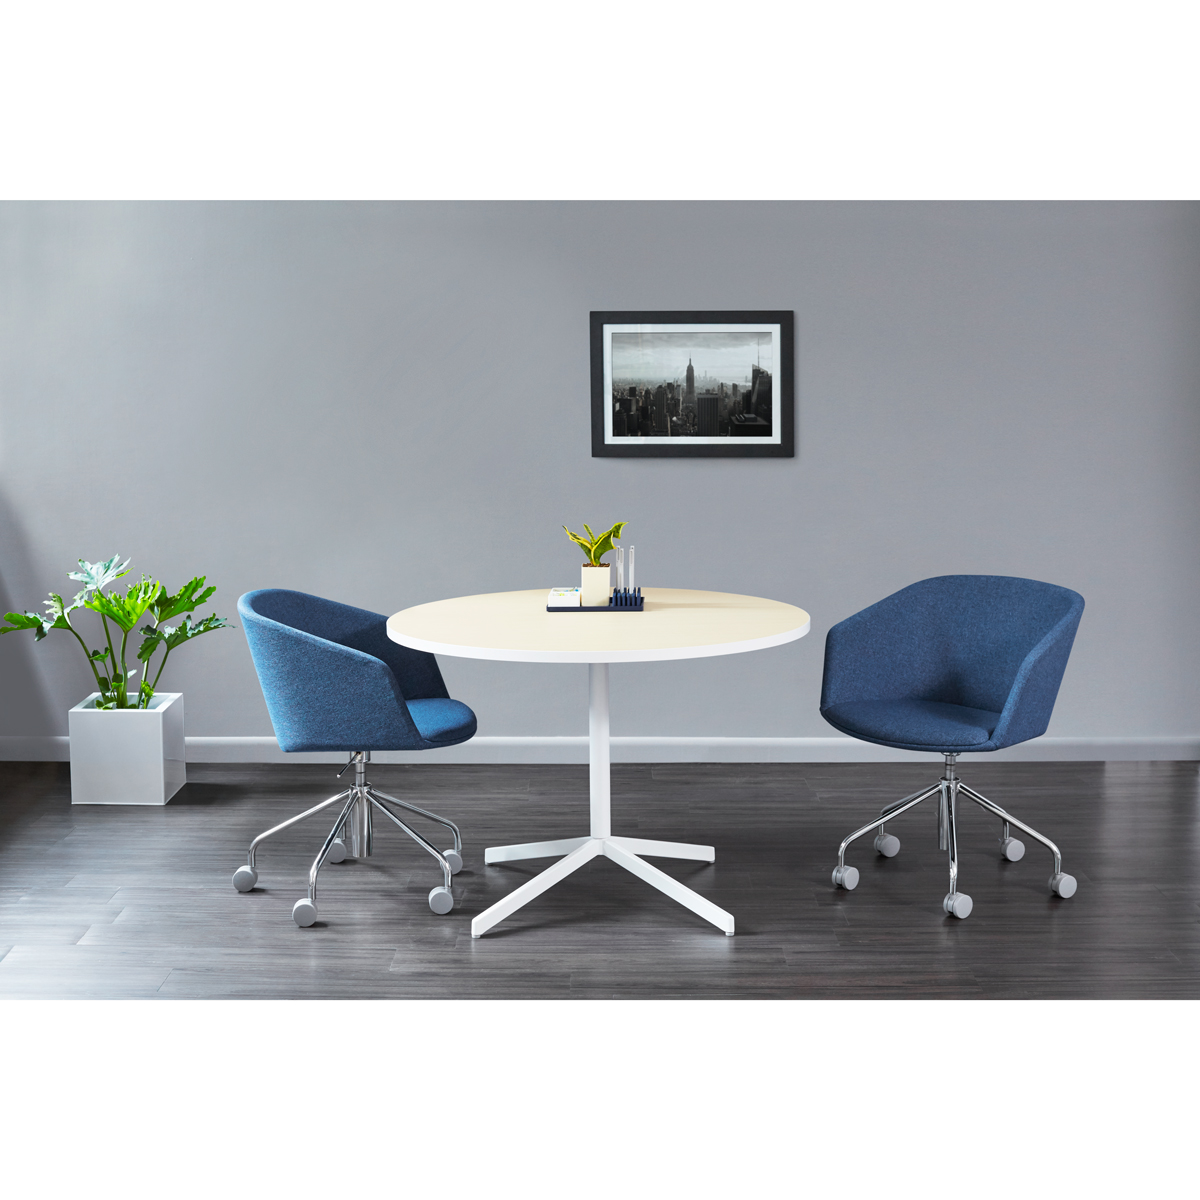 White Touchpoint Meeting Table, 42", Charcoal Legs,White,hi-res